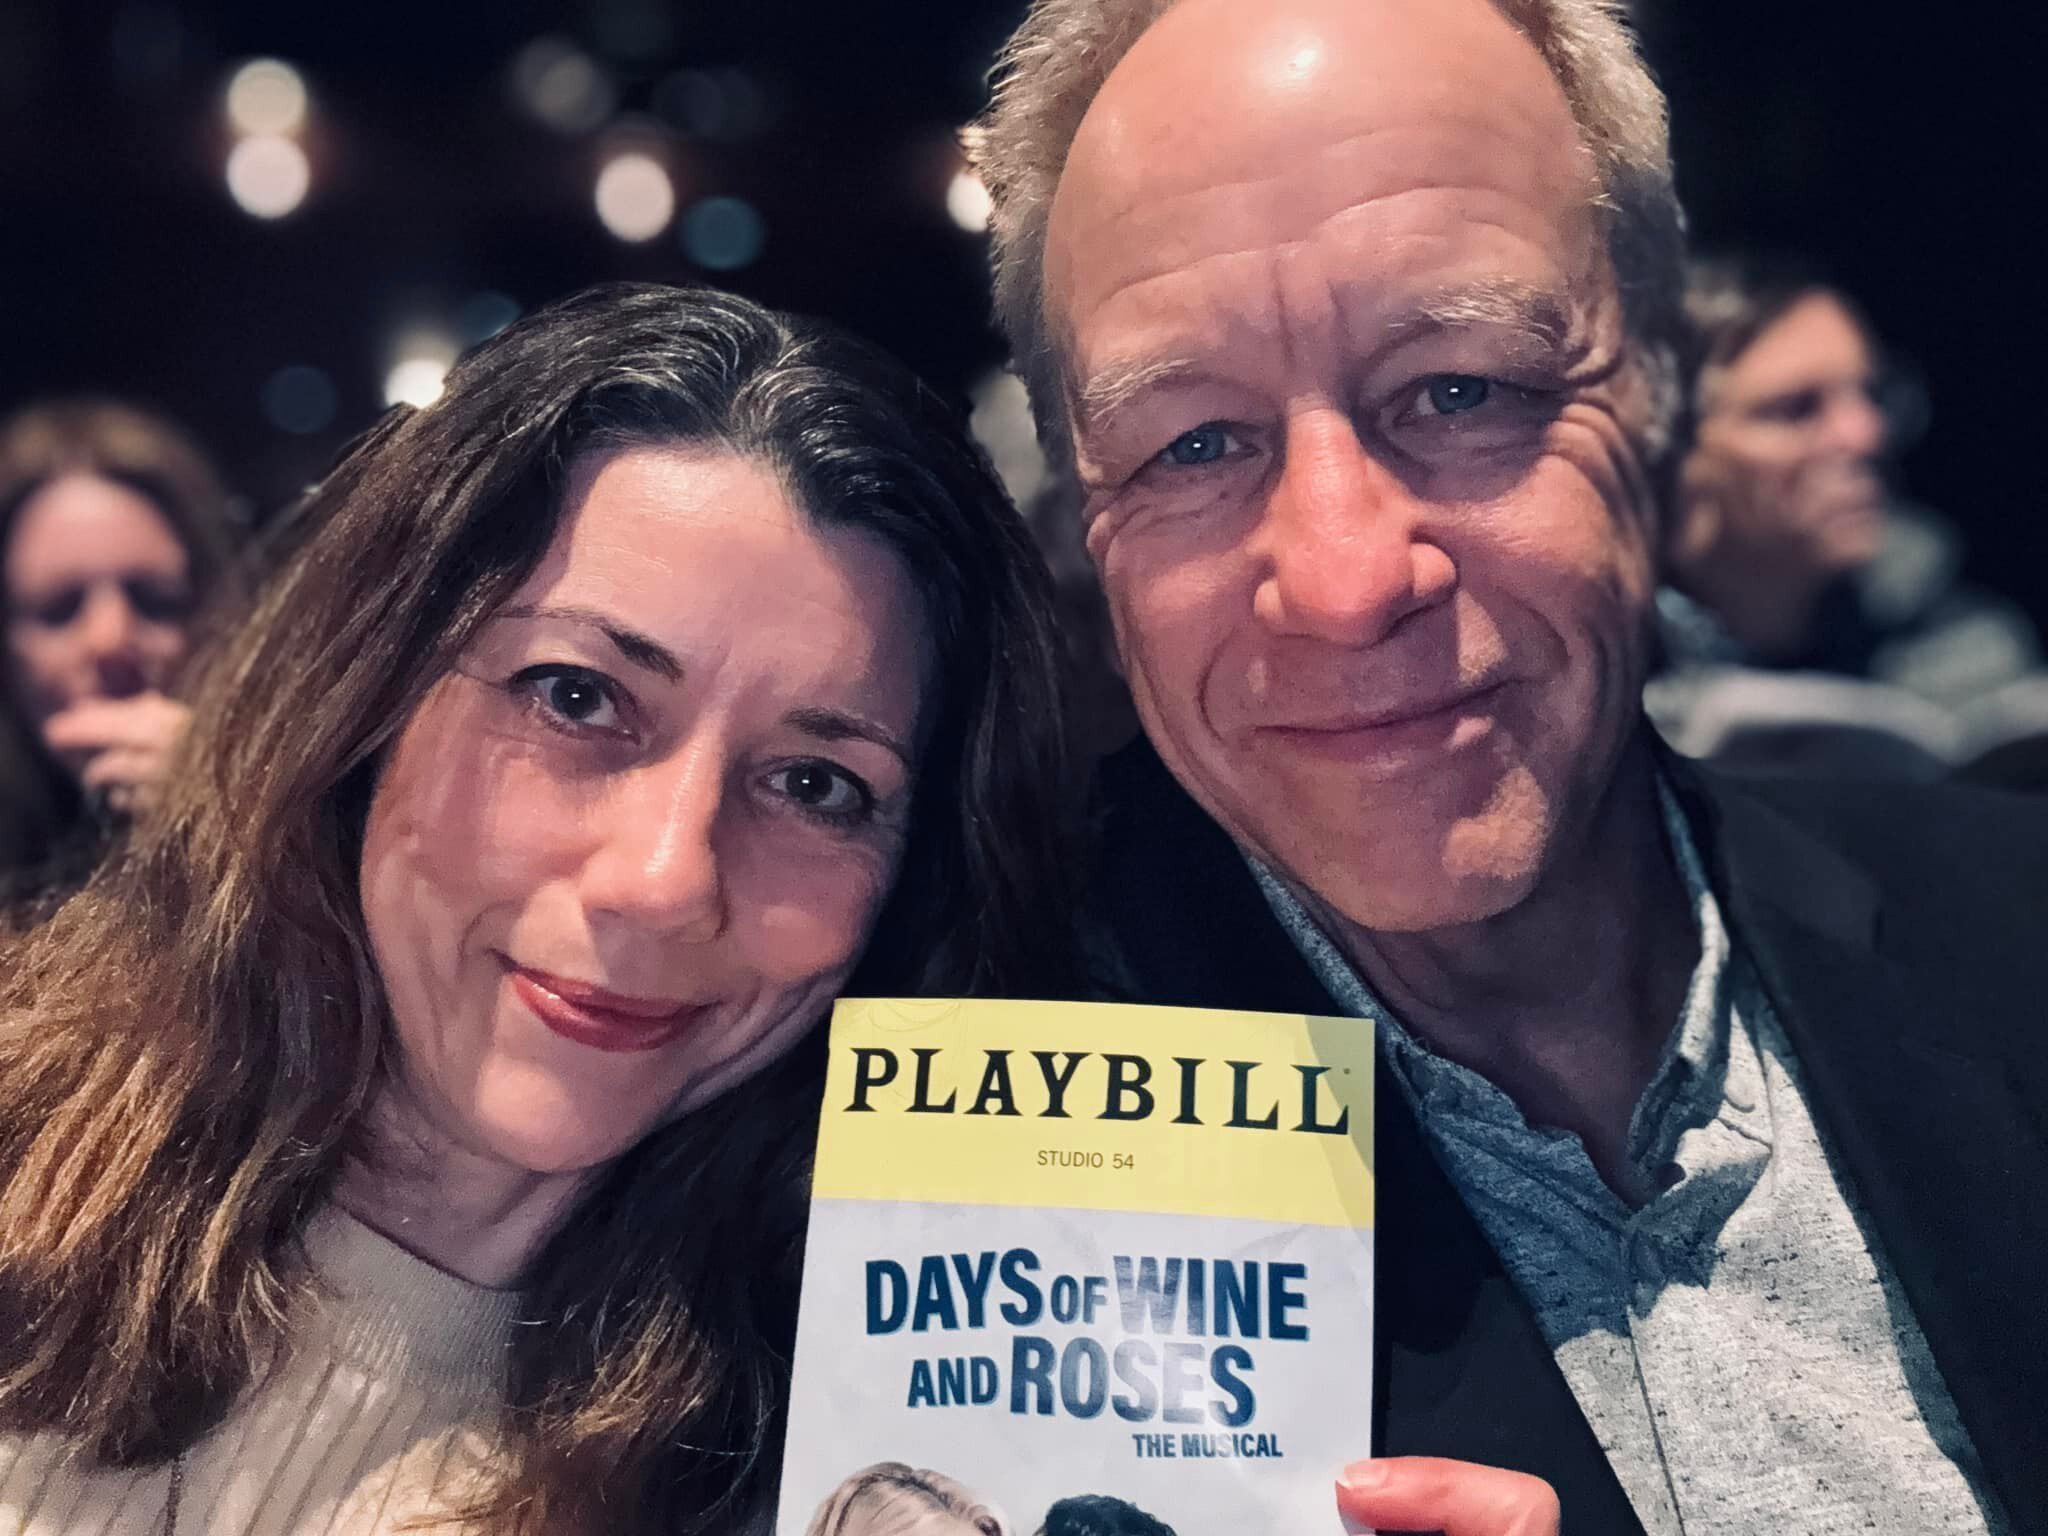 It may be cold and rainy, but the theatre and art is on fire: Days of Wine and Roses &mdash; closing soon. Go see this masterpiece with two of our generation&rsquo;s best Broadway talents. Kelli O'Hara &amp; Brian d'Arcy James are genius; brilliantly